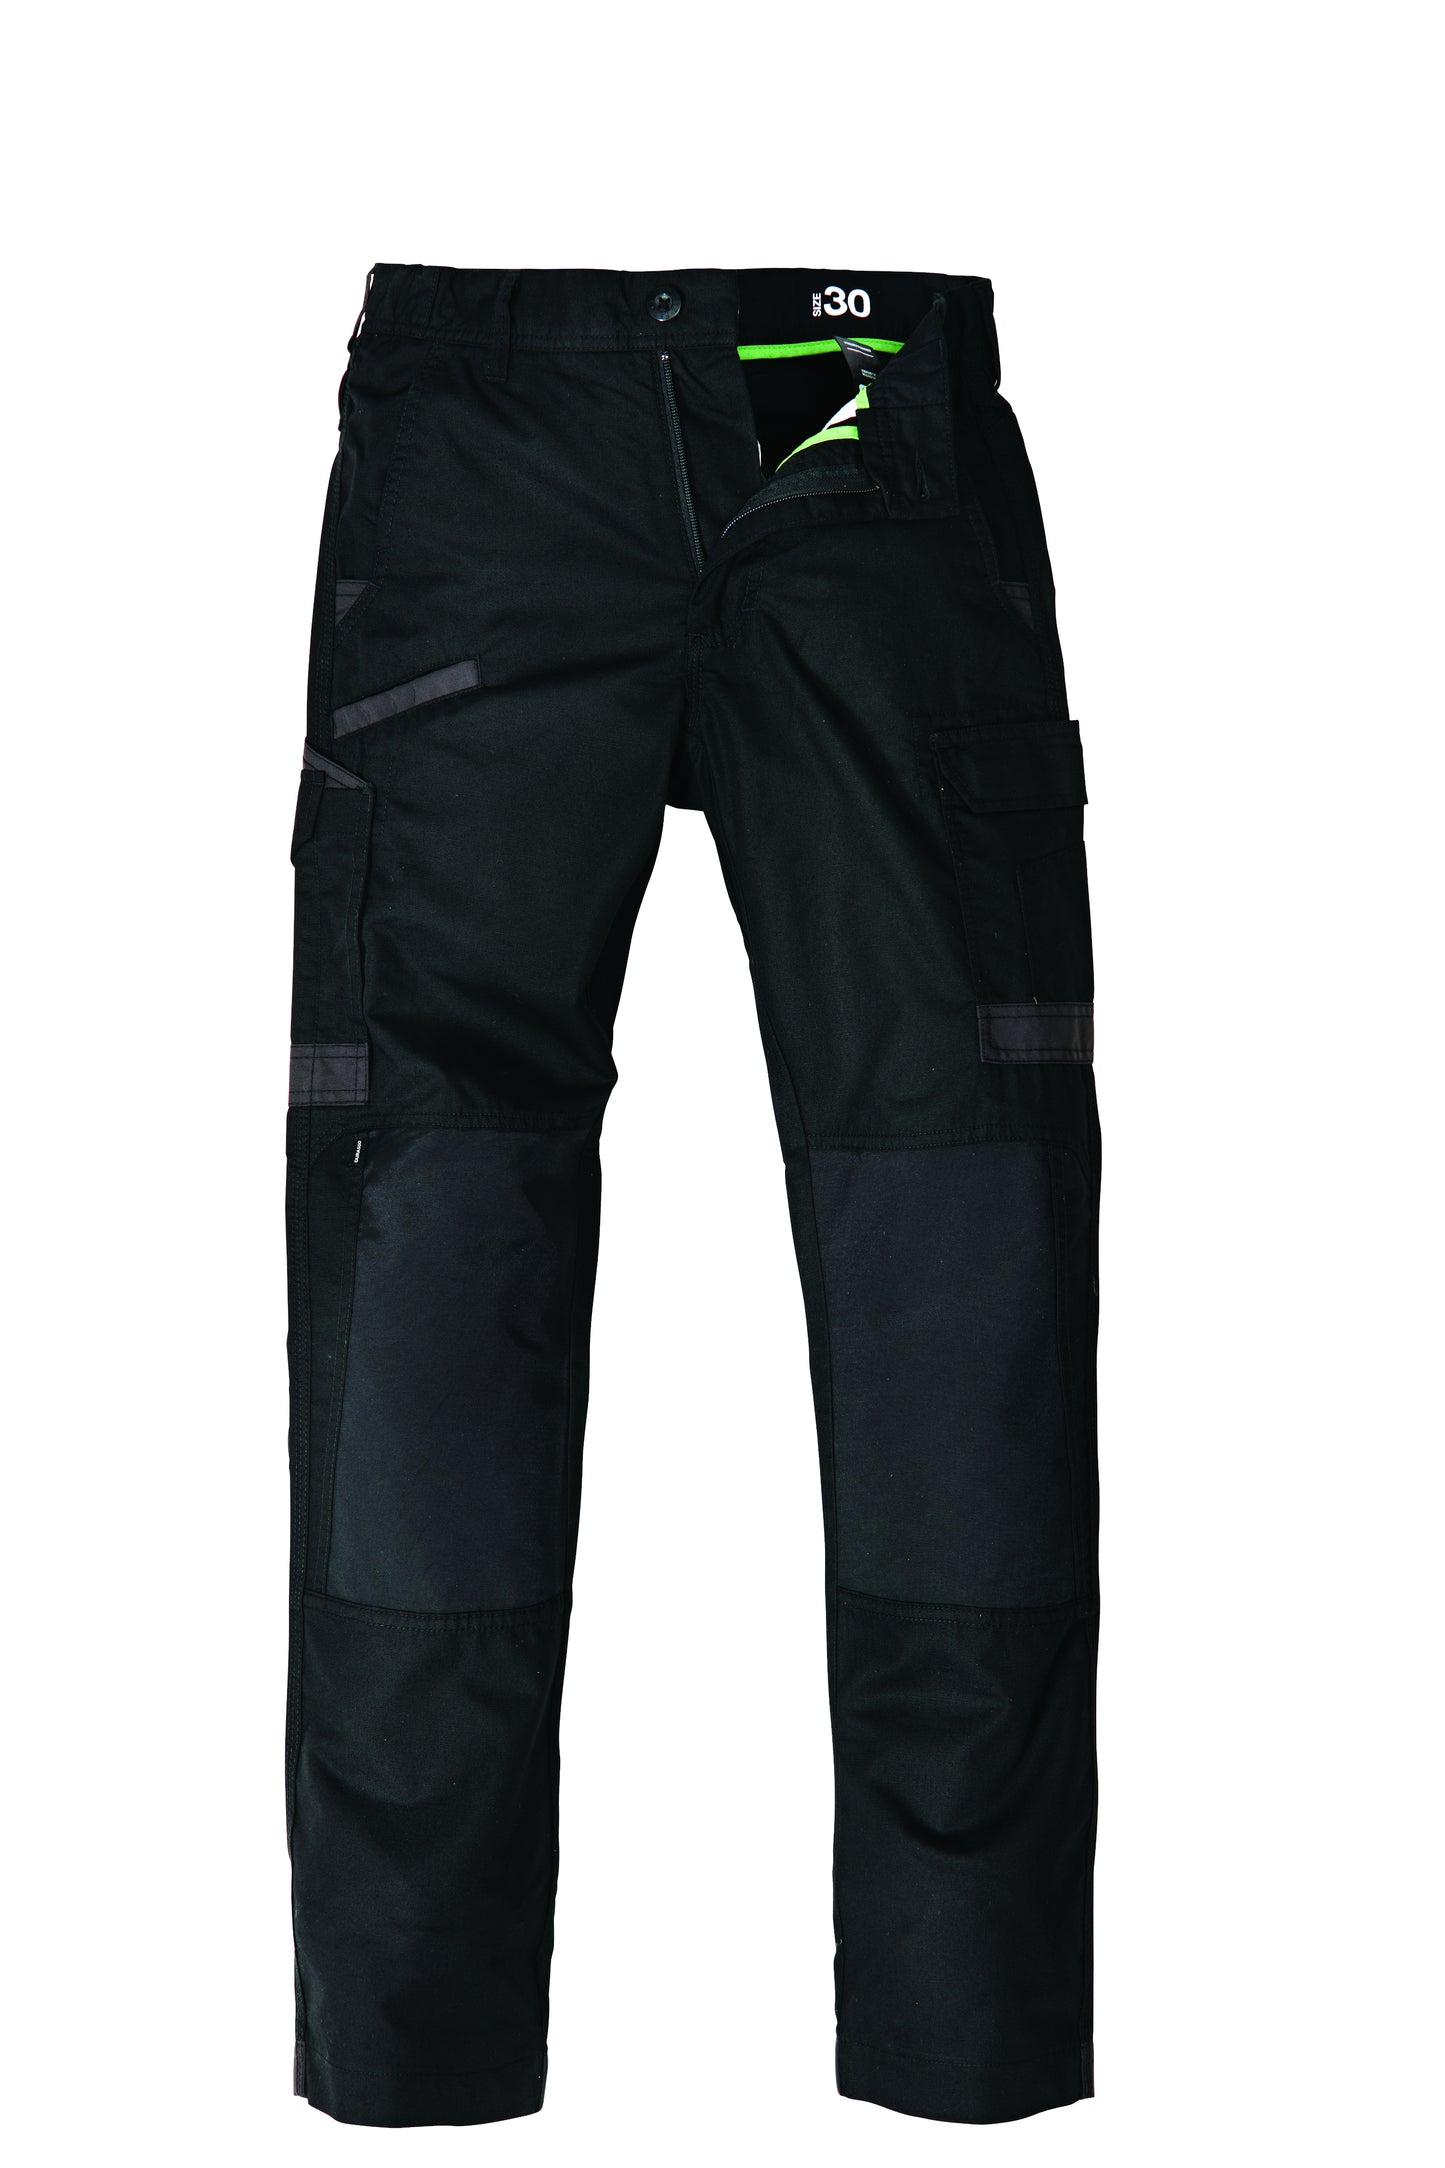 FXD WP-5 NEW LIGHT WEIGHT PANTS